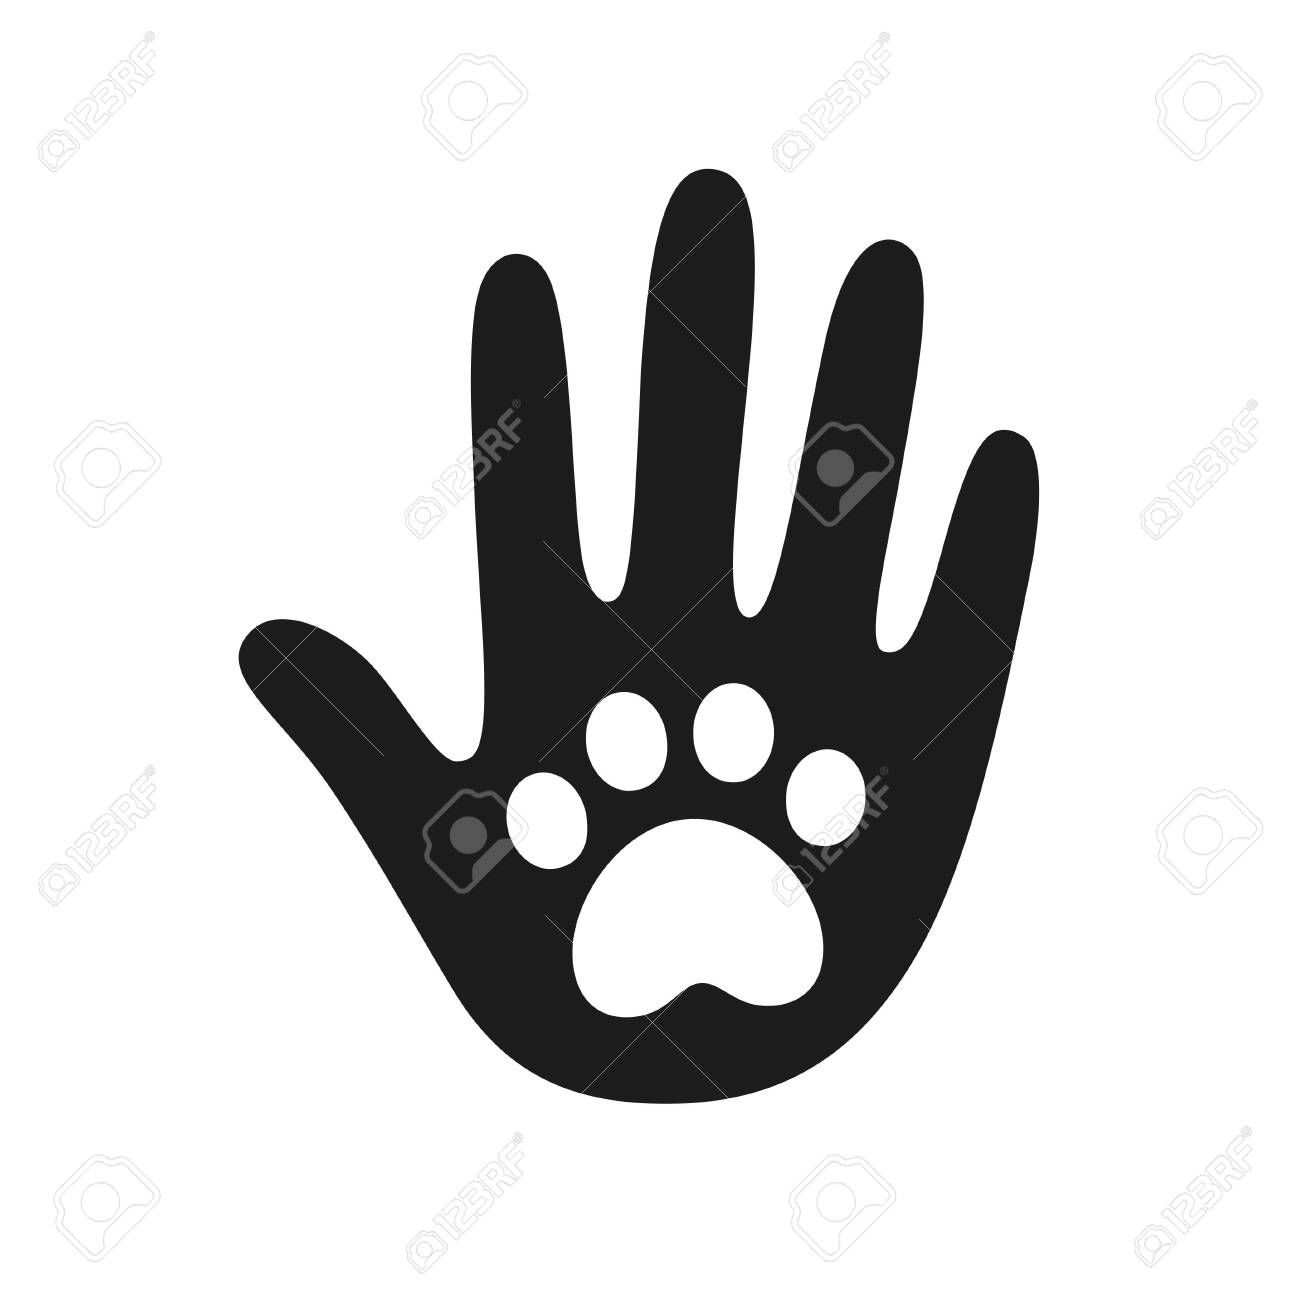 133829895-human-hand-palm-with-dog-or-cat-paw-print-symbol-veterinary-pet-care-shelter-adoption-or-animal-char